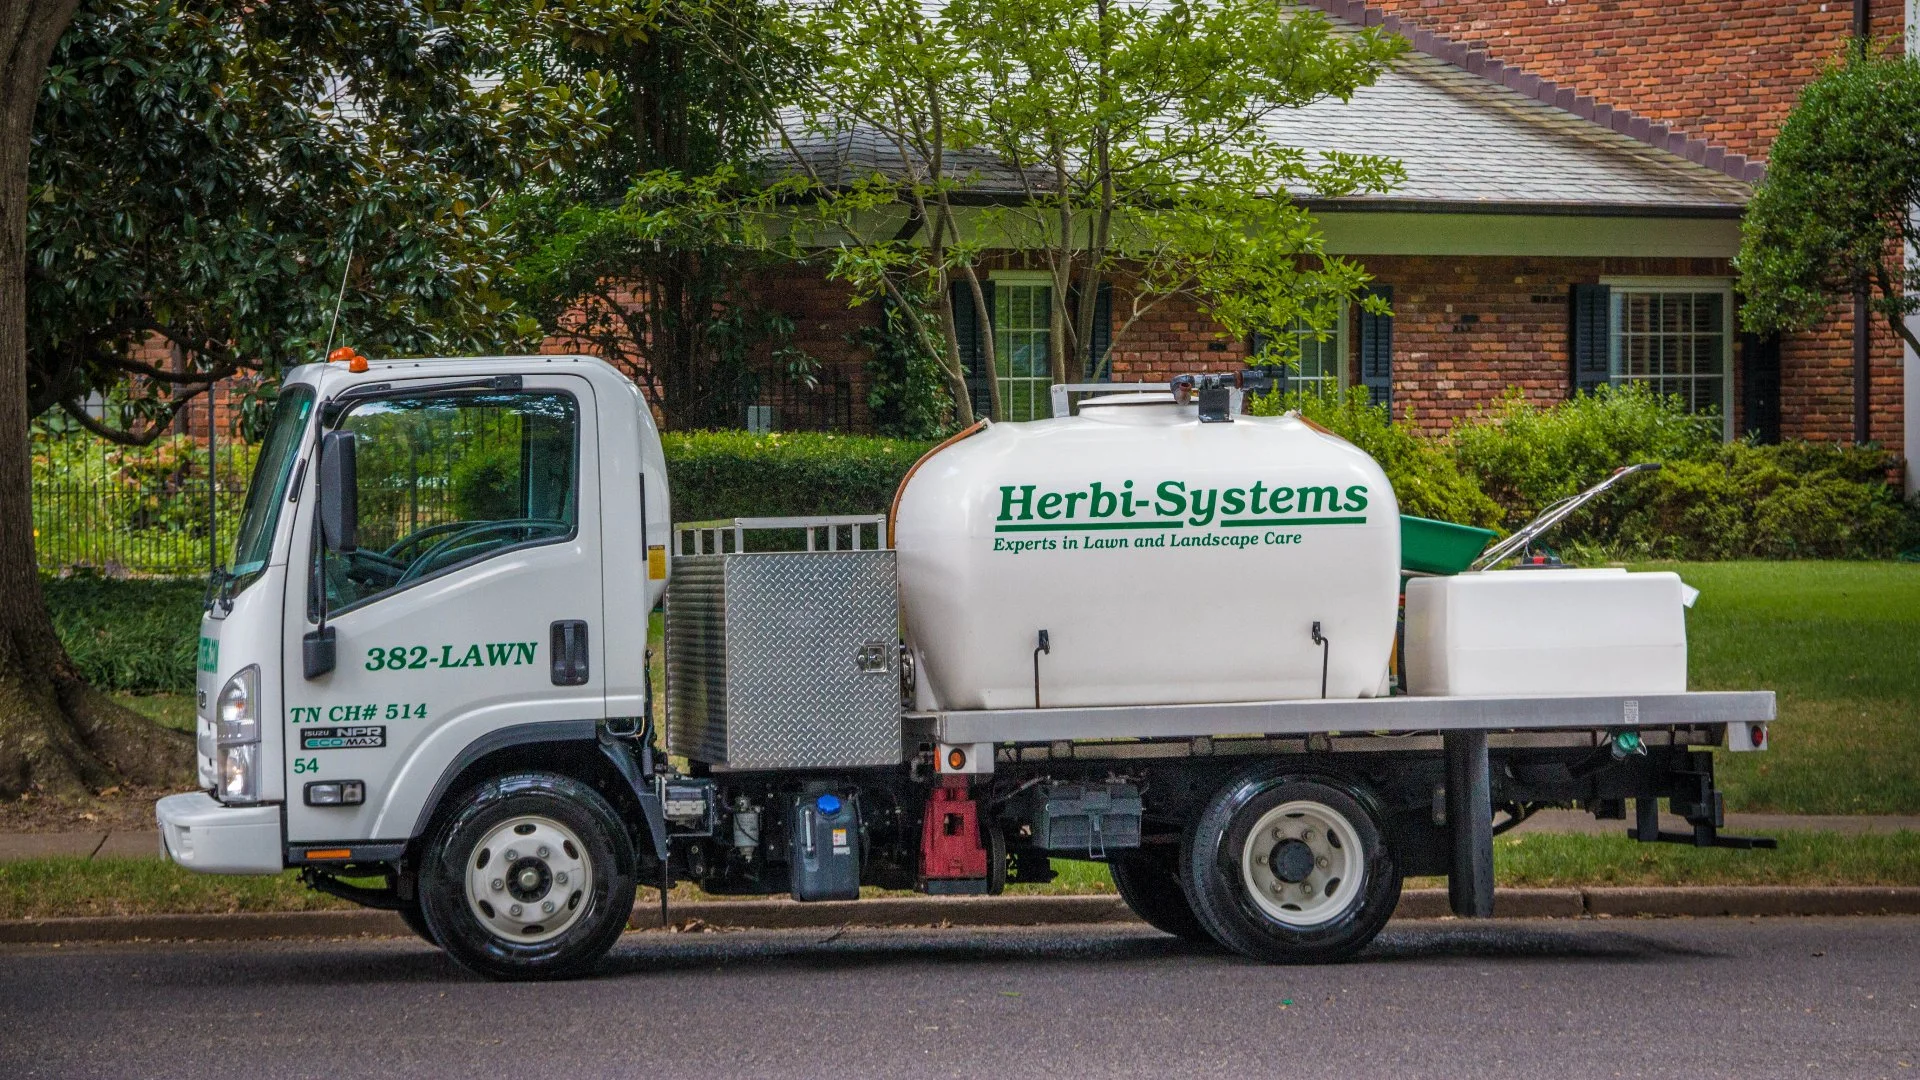 Herbi-Systems truck in front of a property.